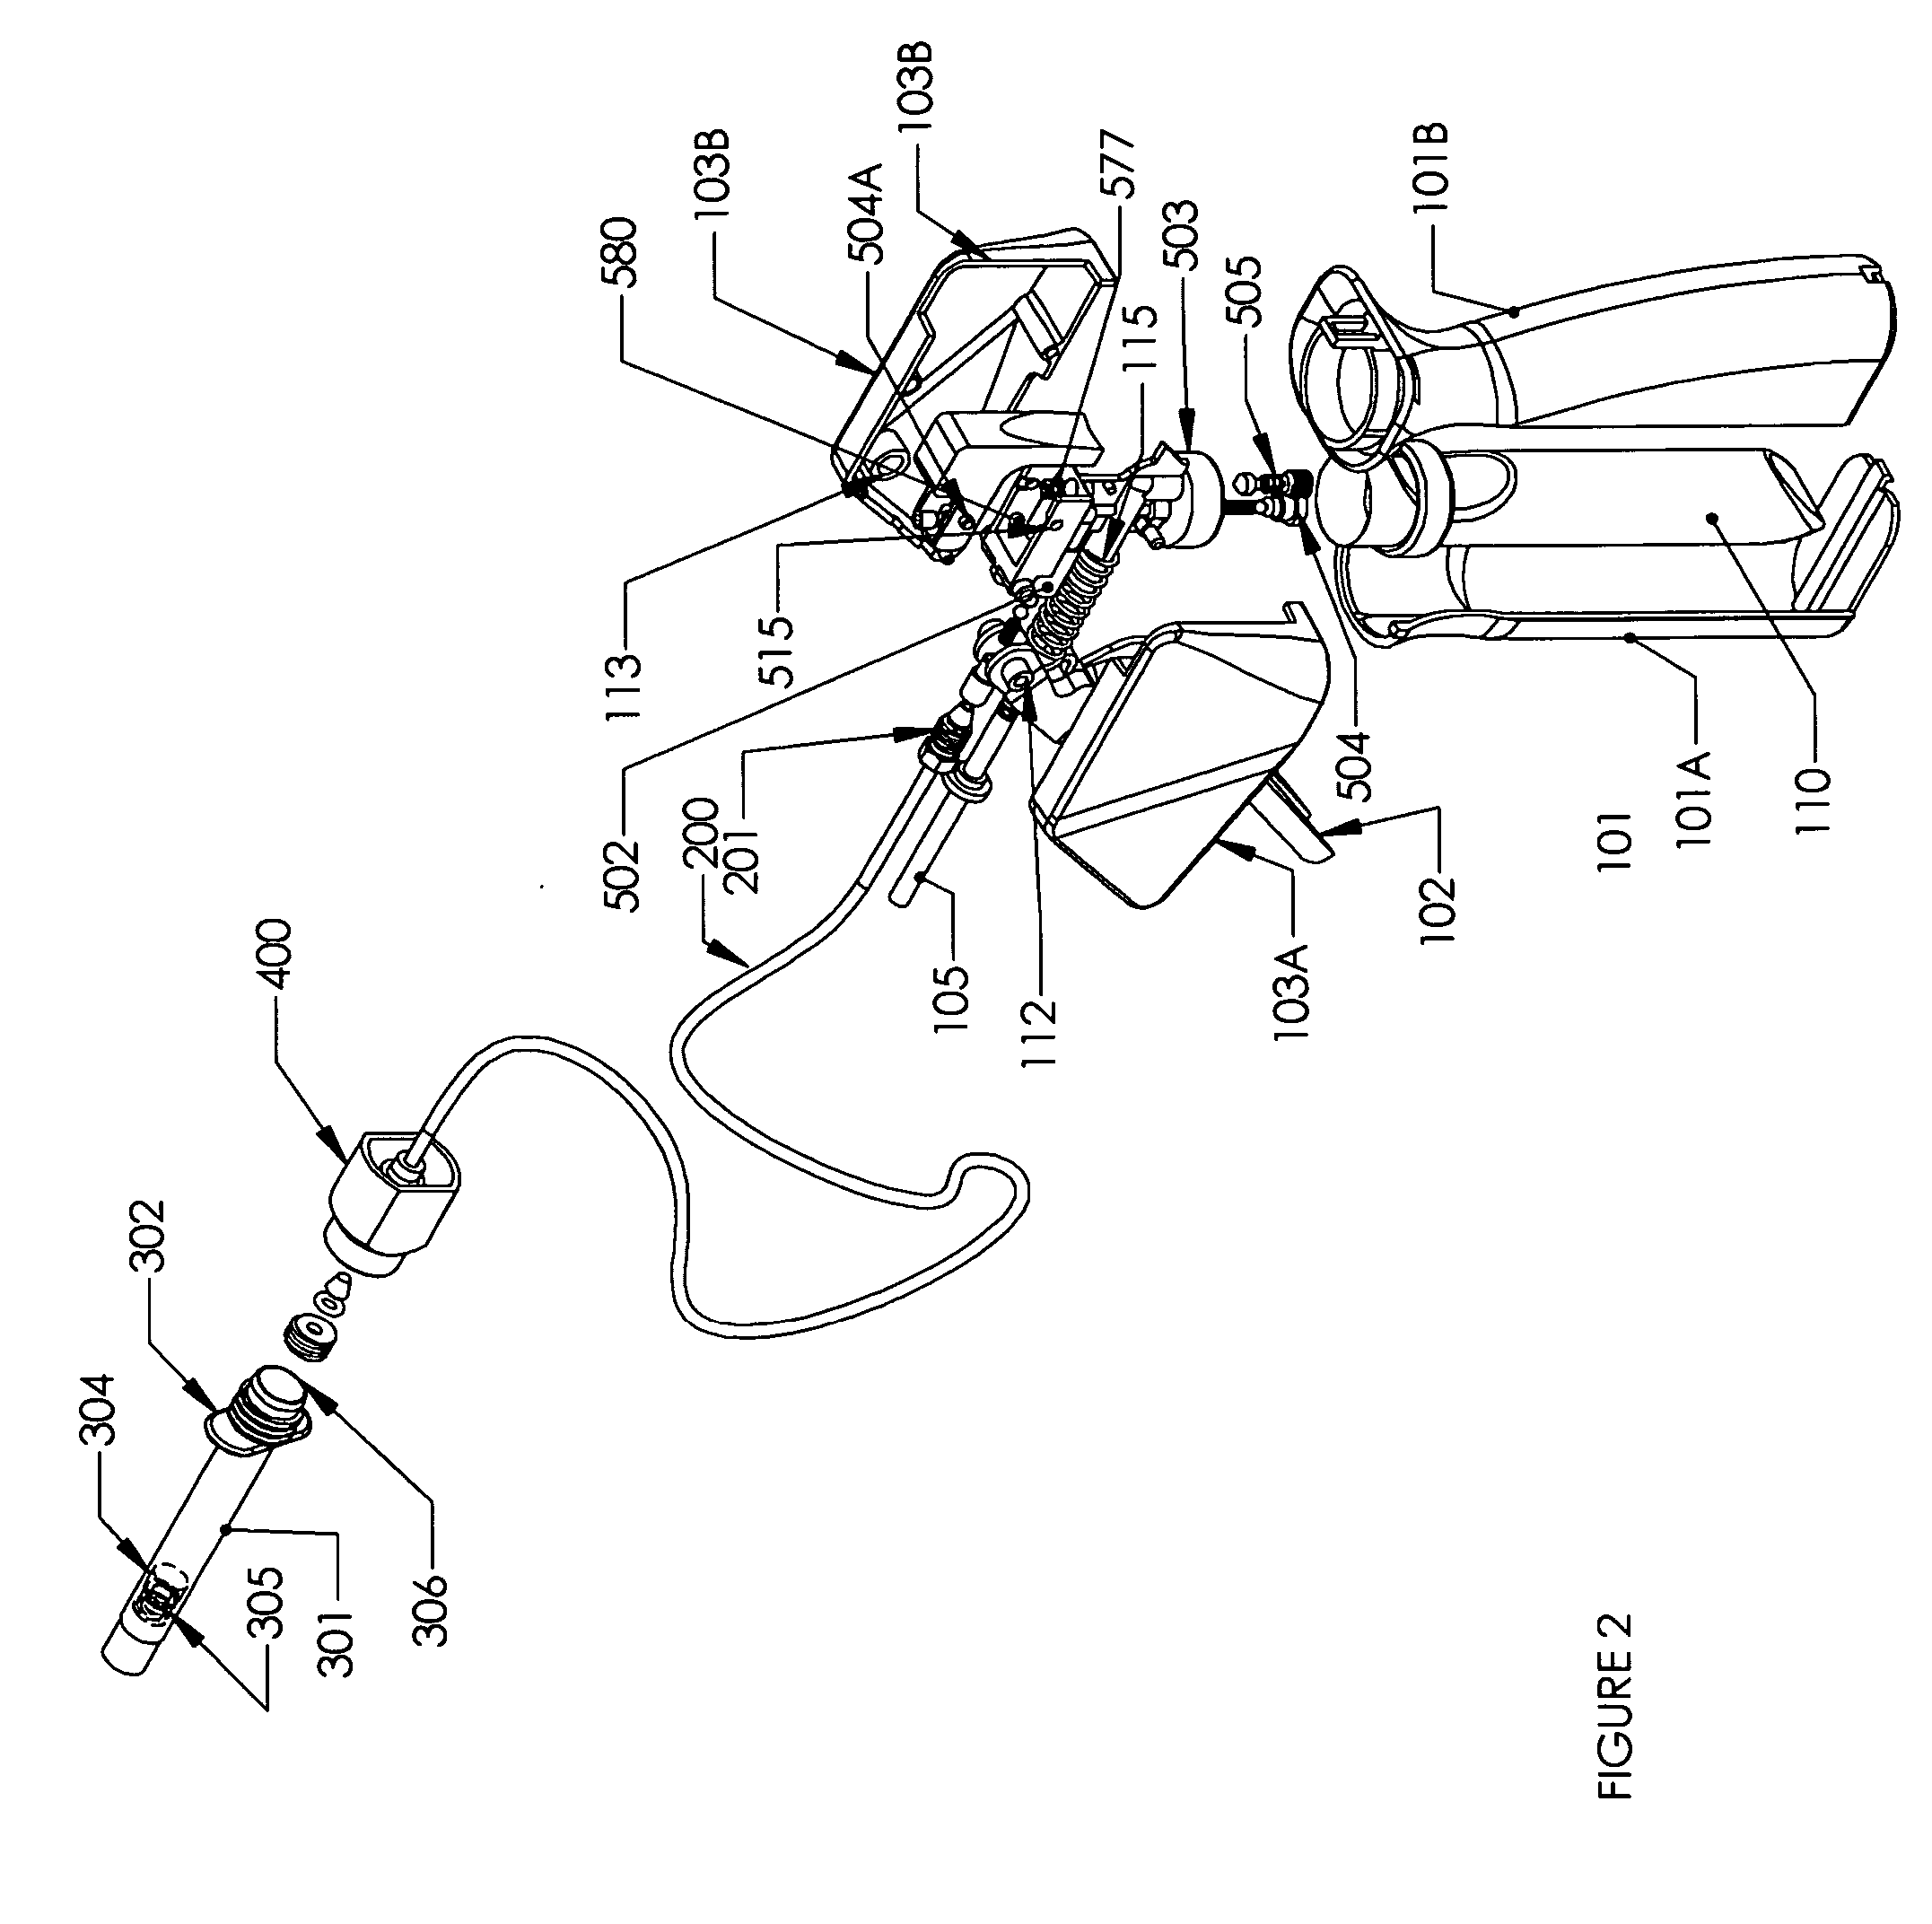 Manual pump mechanism and delivery system